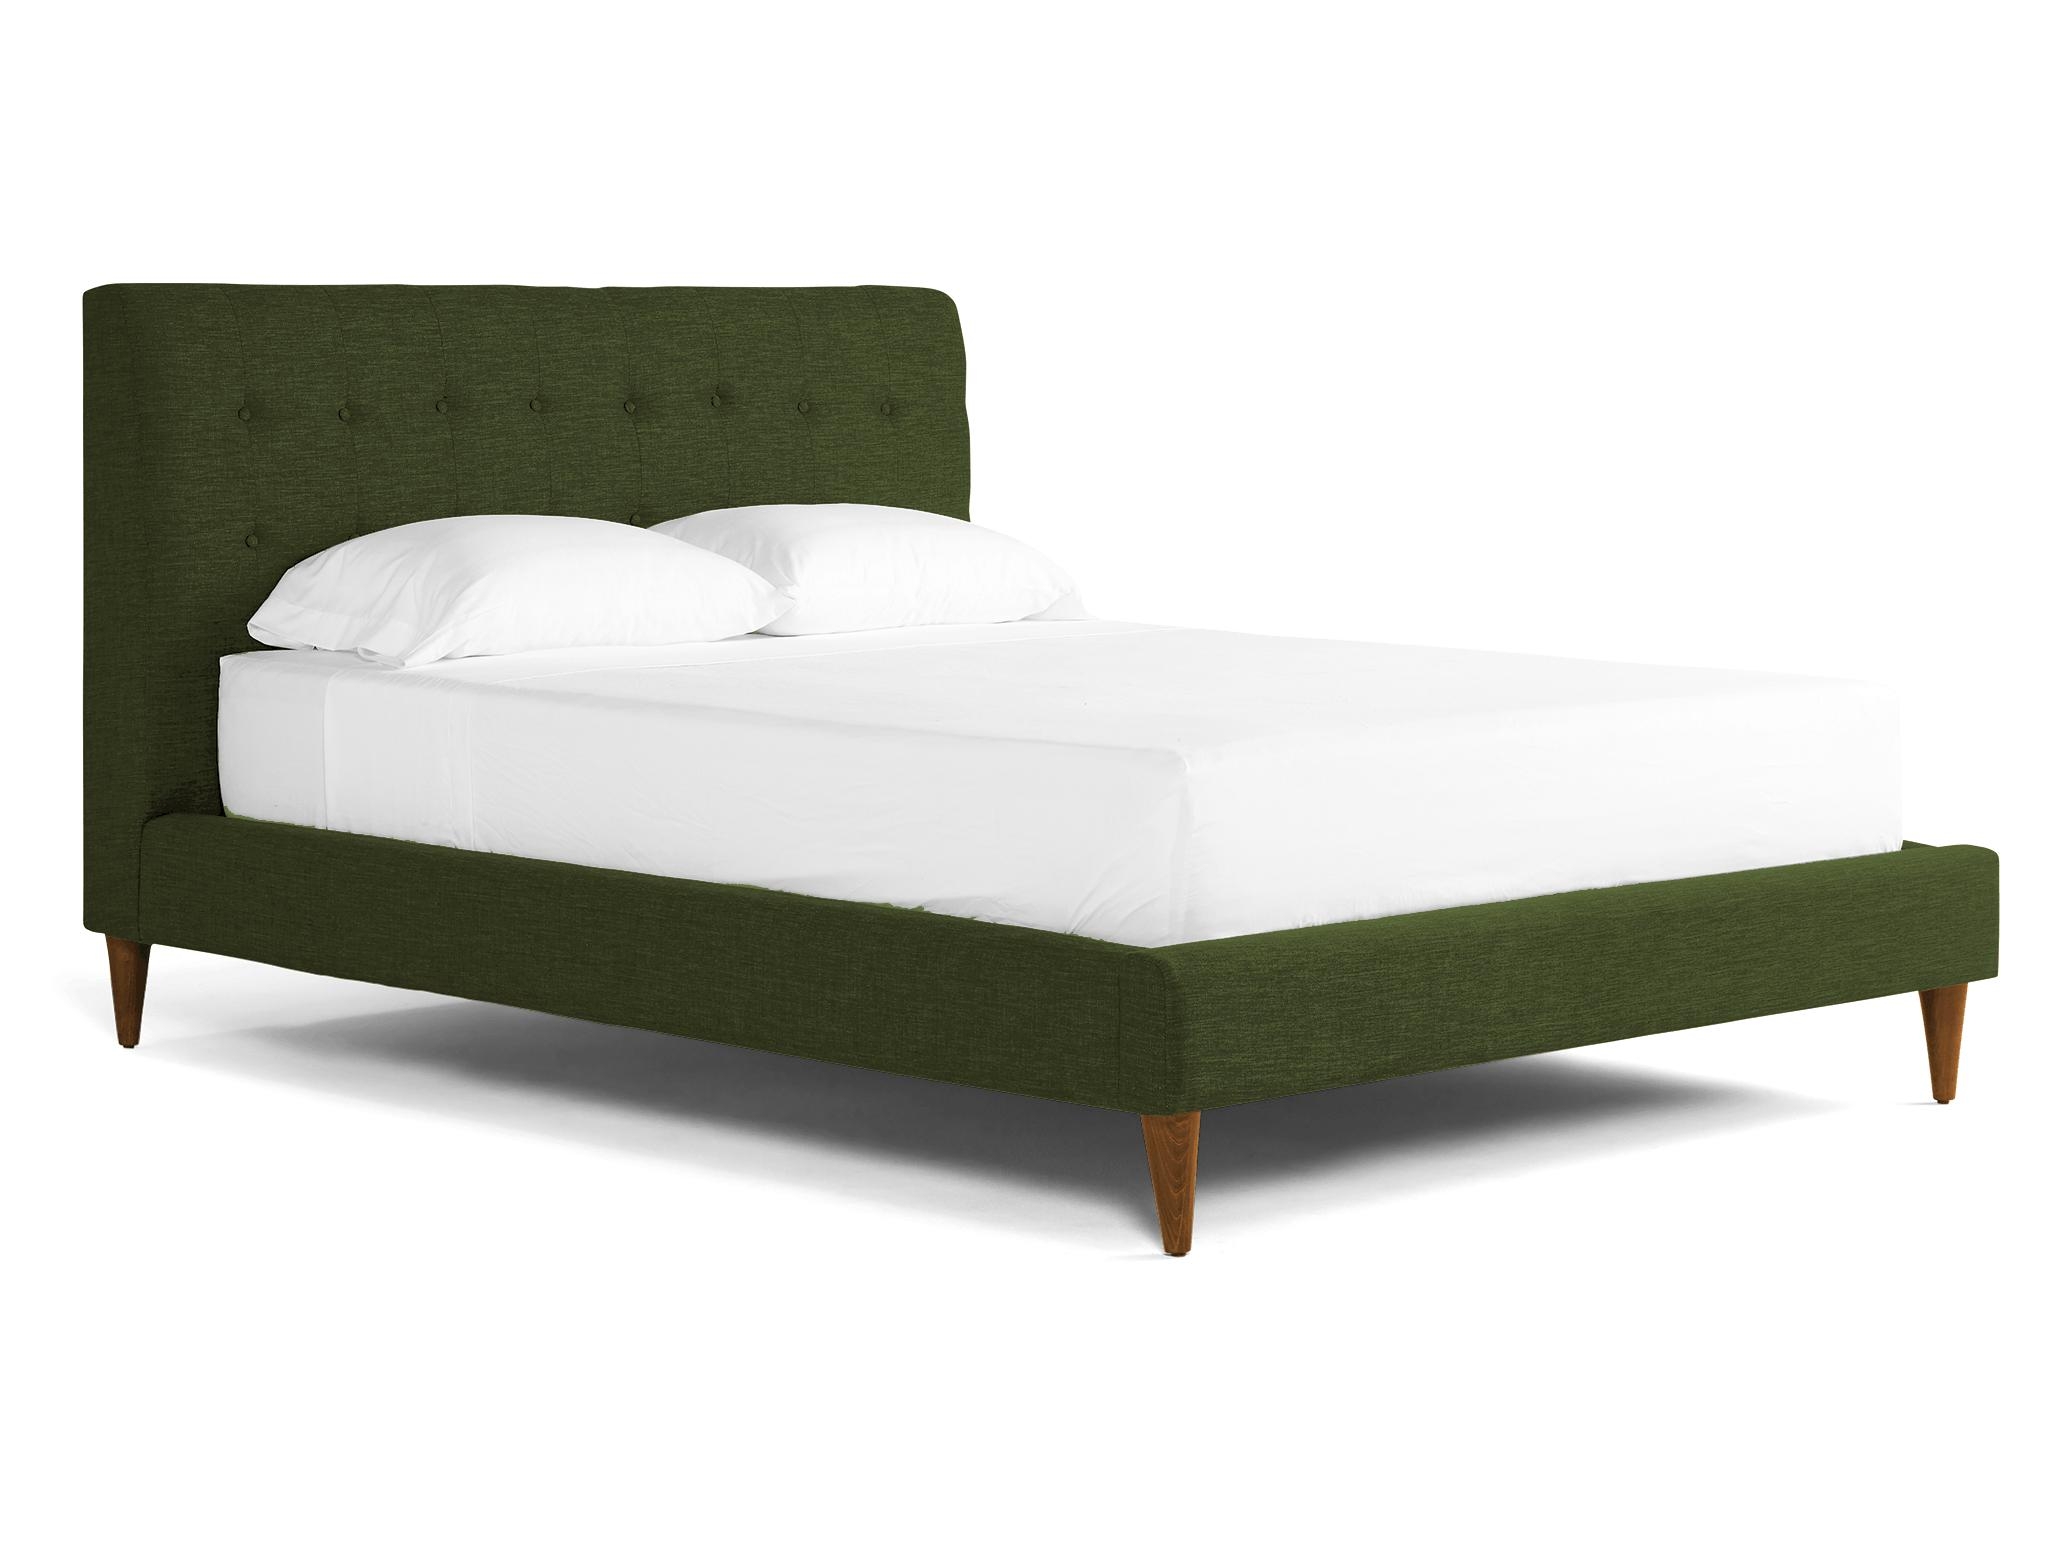 Green Eliot Mid Century Modern Bed - Royale Forest - Mocha - Queen - Image 1